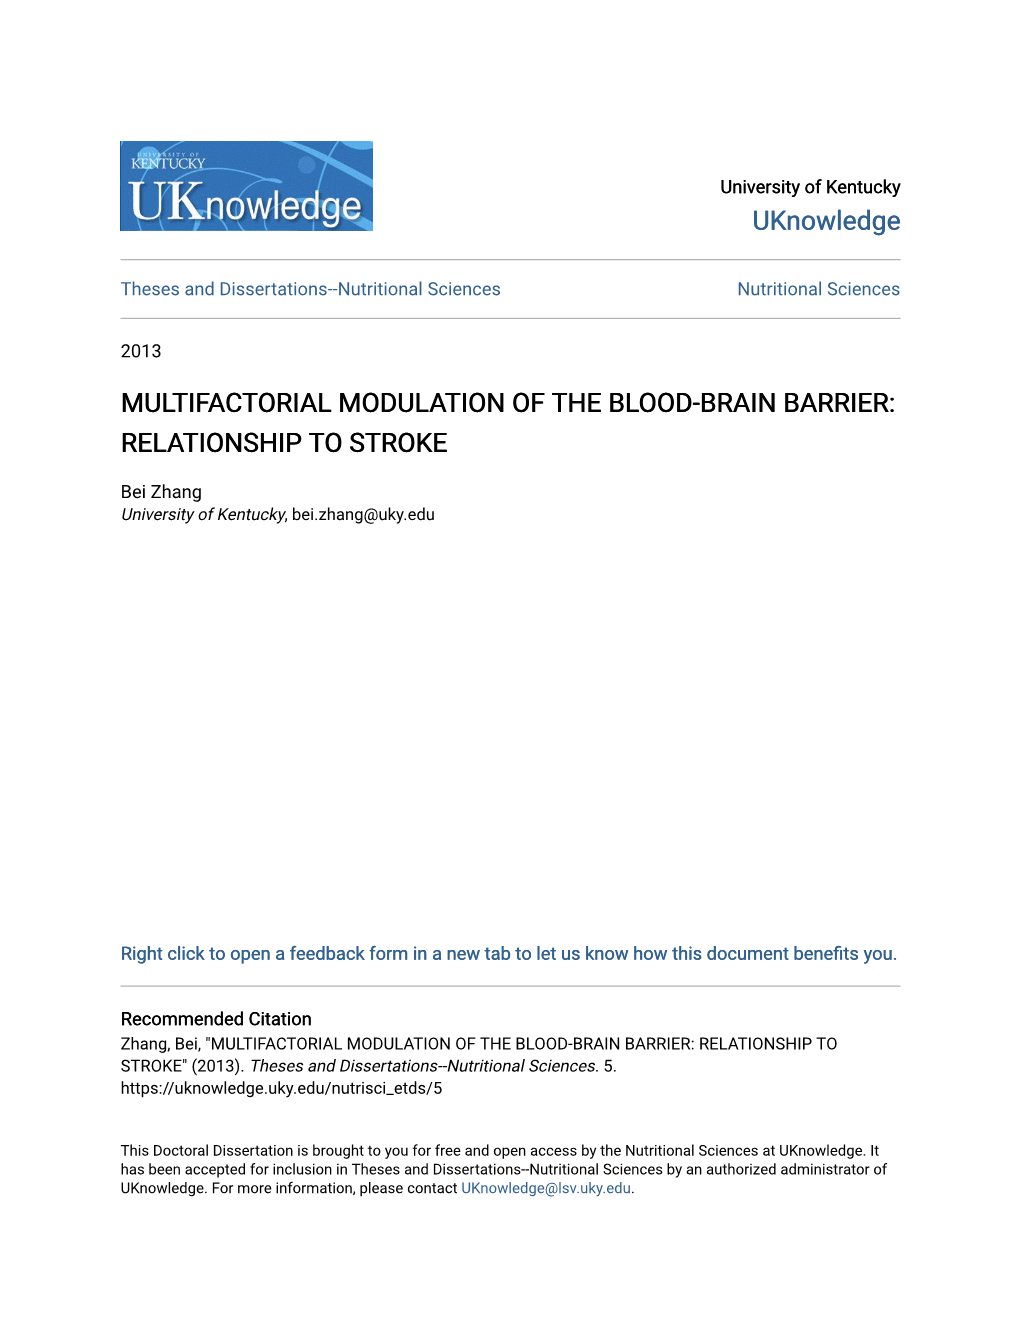 Multifactorial Modulation of the Blood-Brain Barrier: Relationship to Stroke